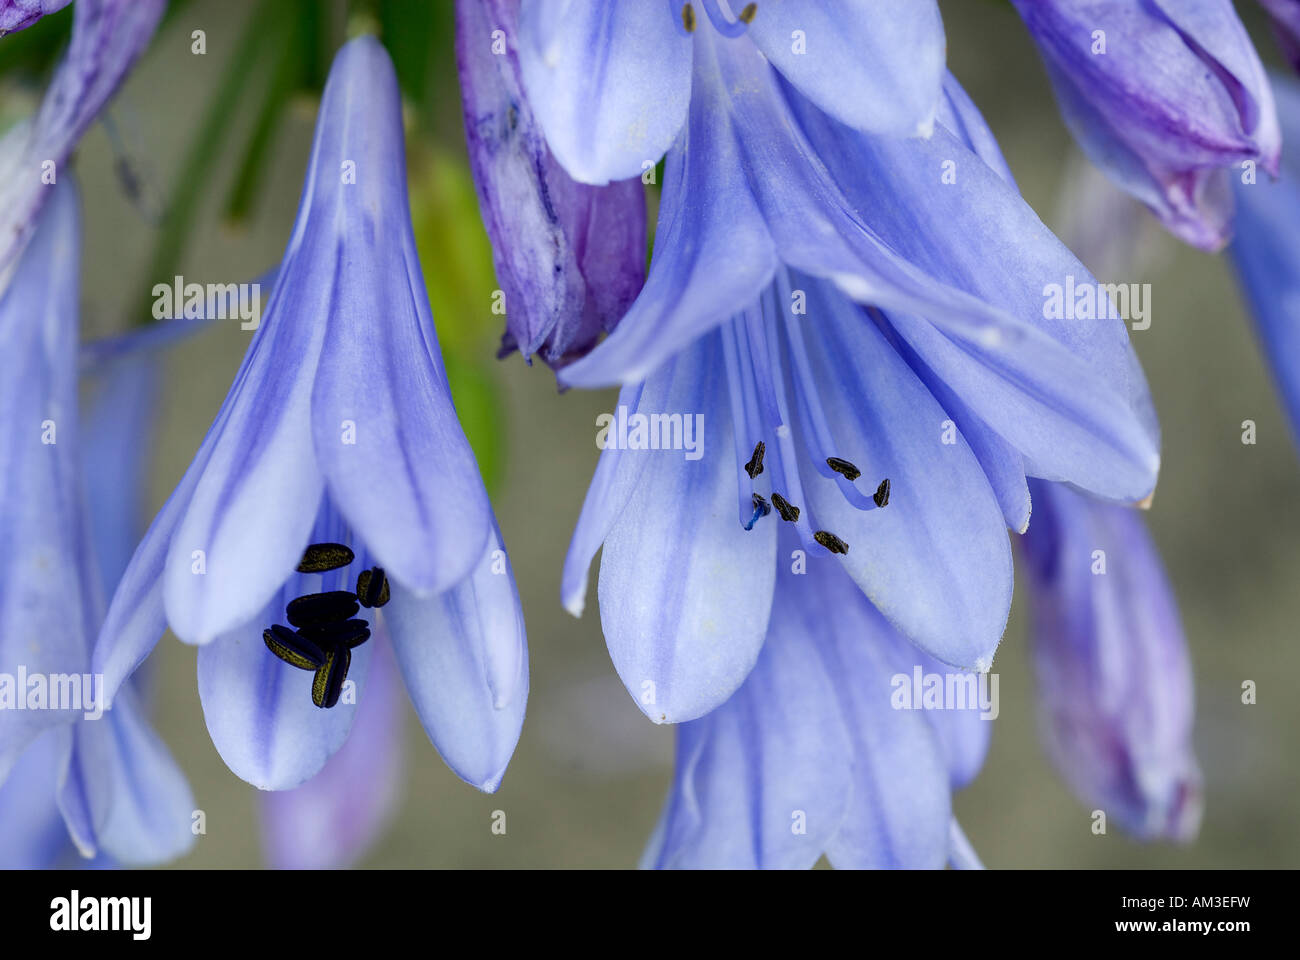 Lily (Agapanthus) Stock Photo